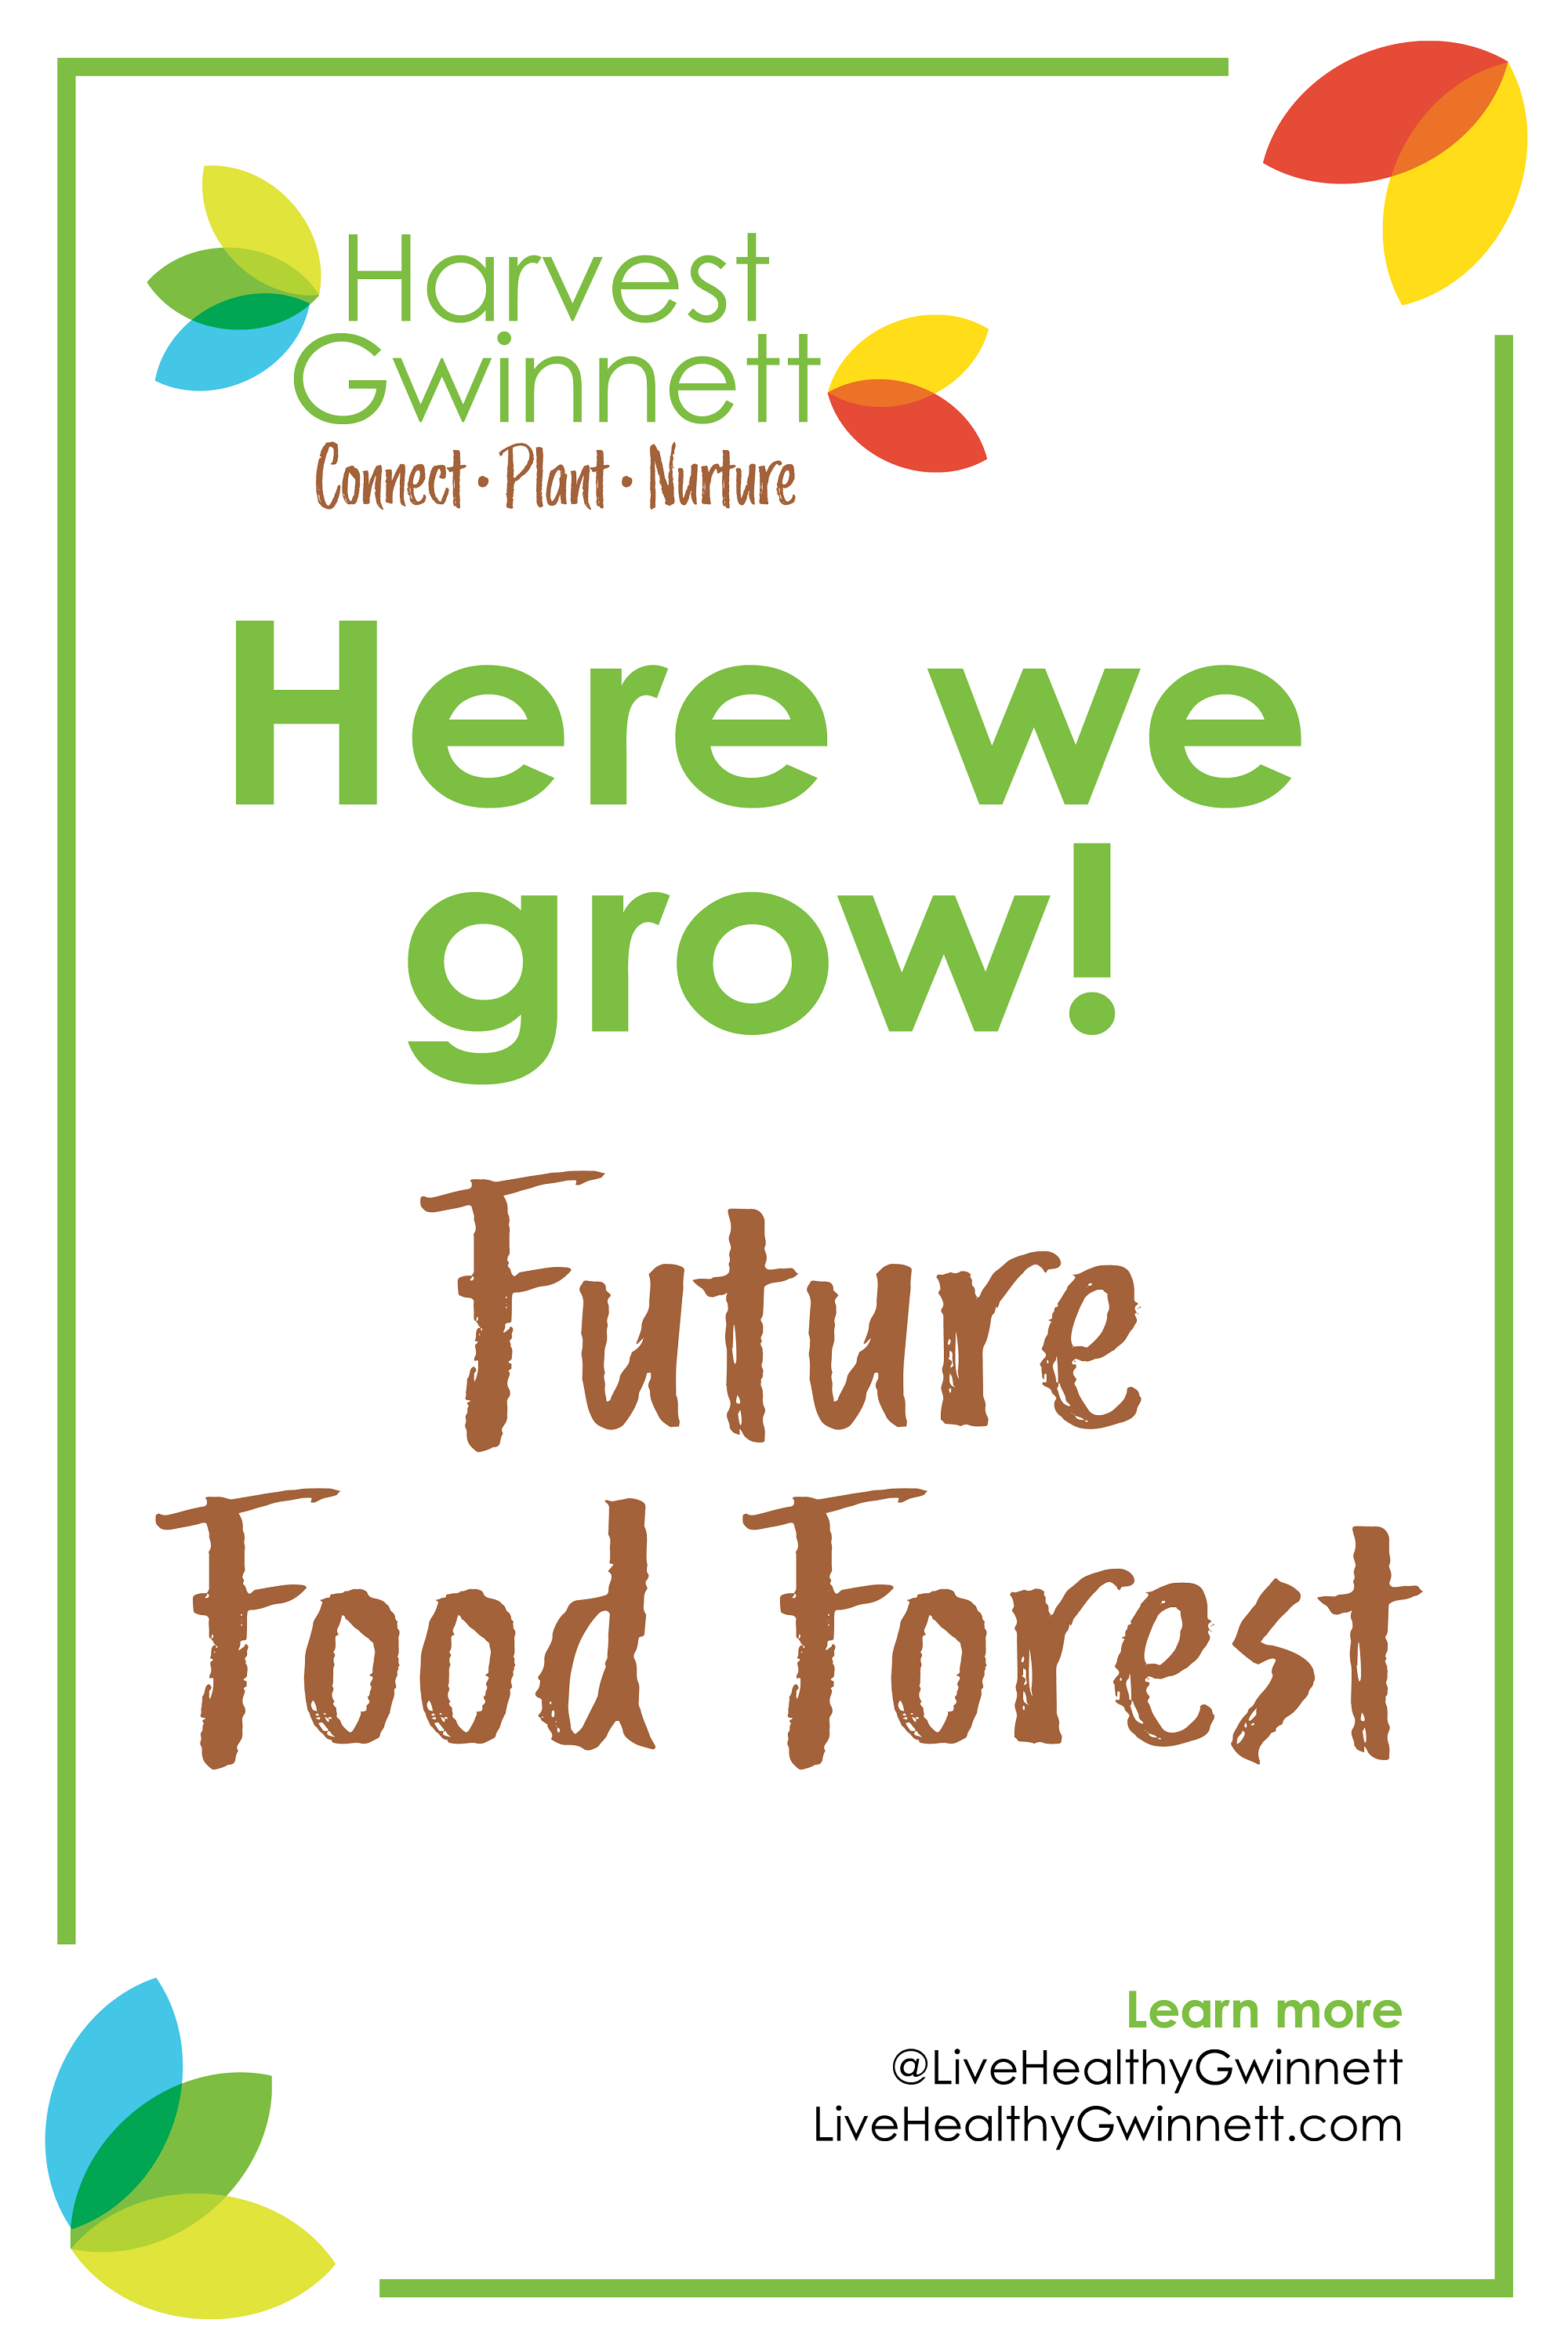 Watch Us Grow-Food Forest Sign